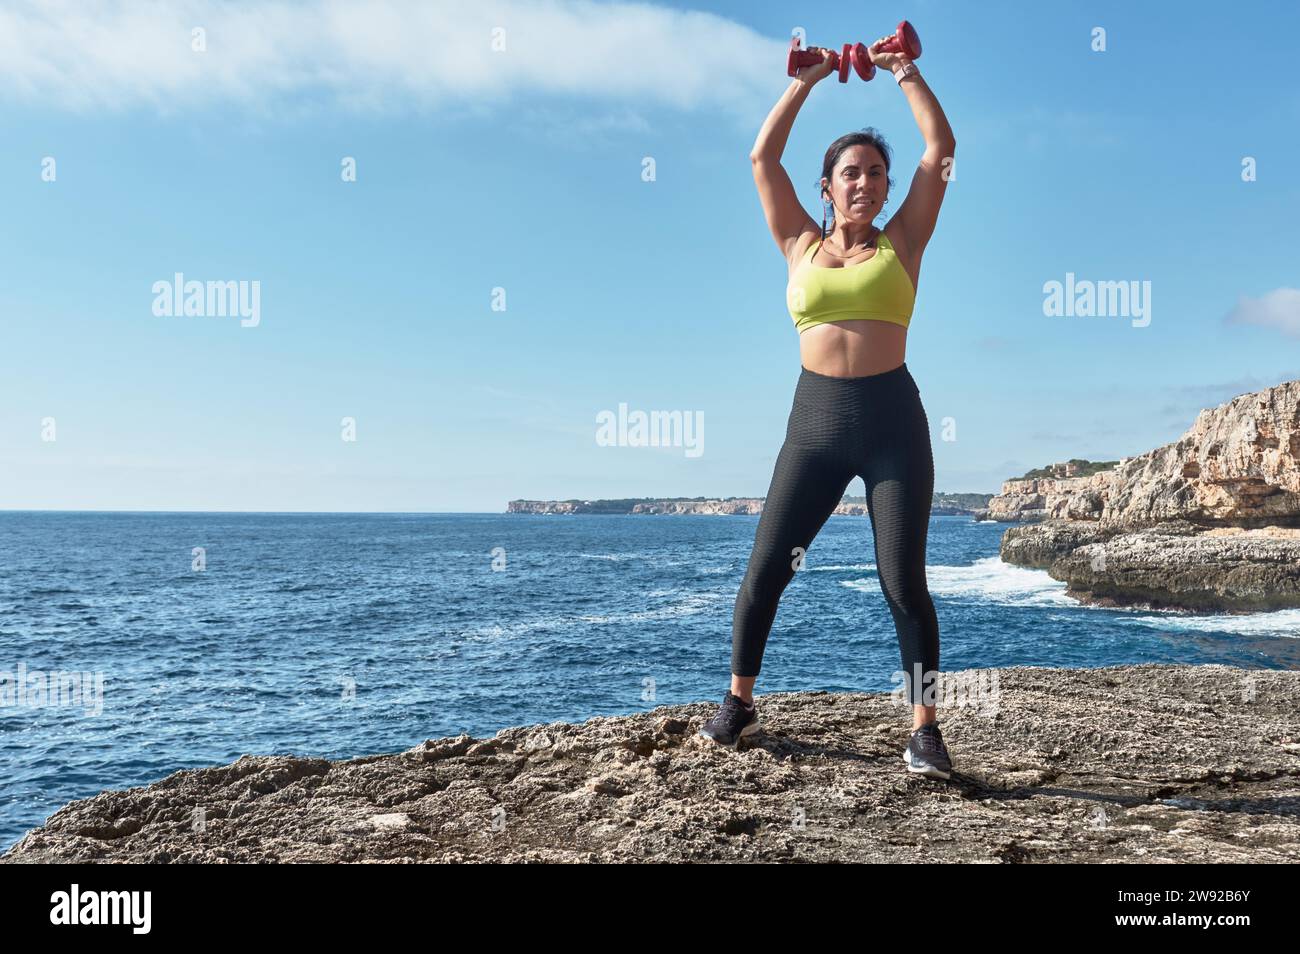 Latin woman, middle-aged, wearing sportswear, training, doing physical exercises, plank, sit-ups, climber's step, burning calories, keeping fit Stock Photo